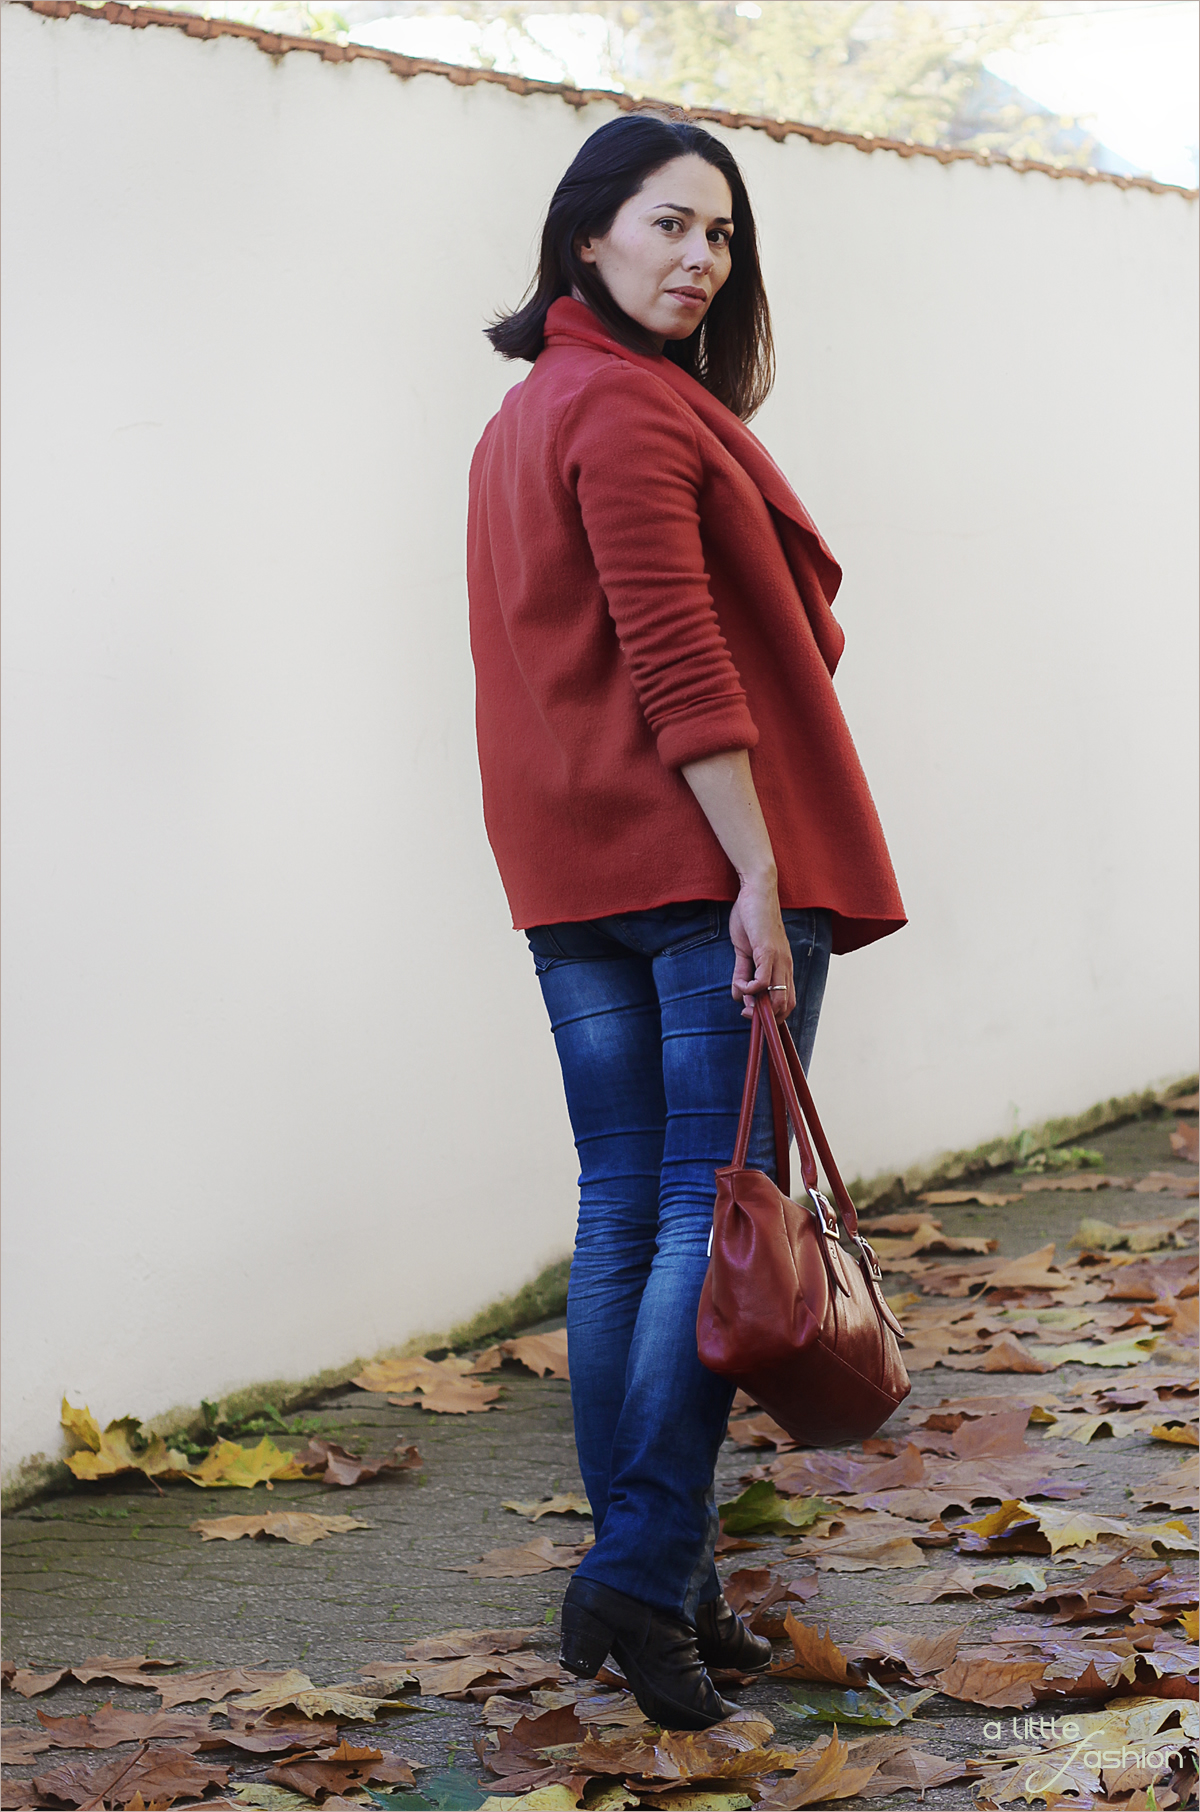 Ein letztes Herbst-Outfit | A Little Fashion | https://www.filizity.com/fashion/ein-letztes-herbst-outfit